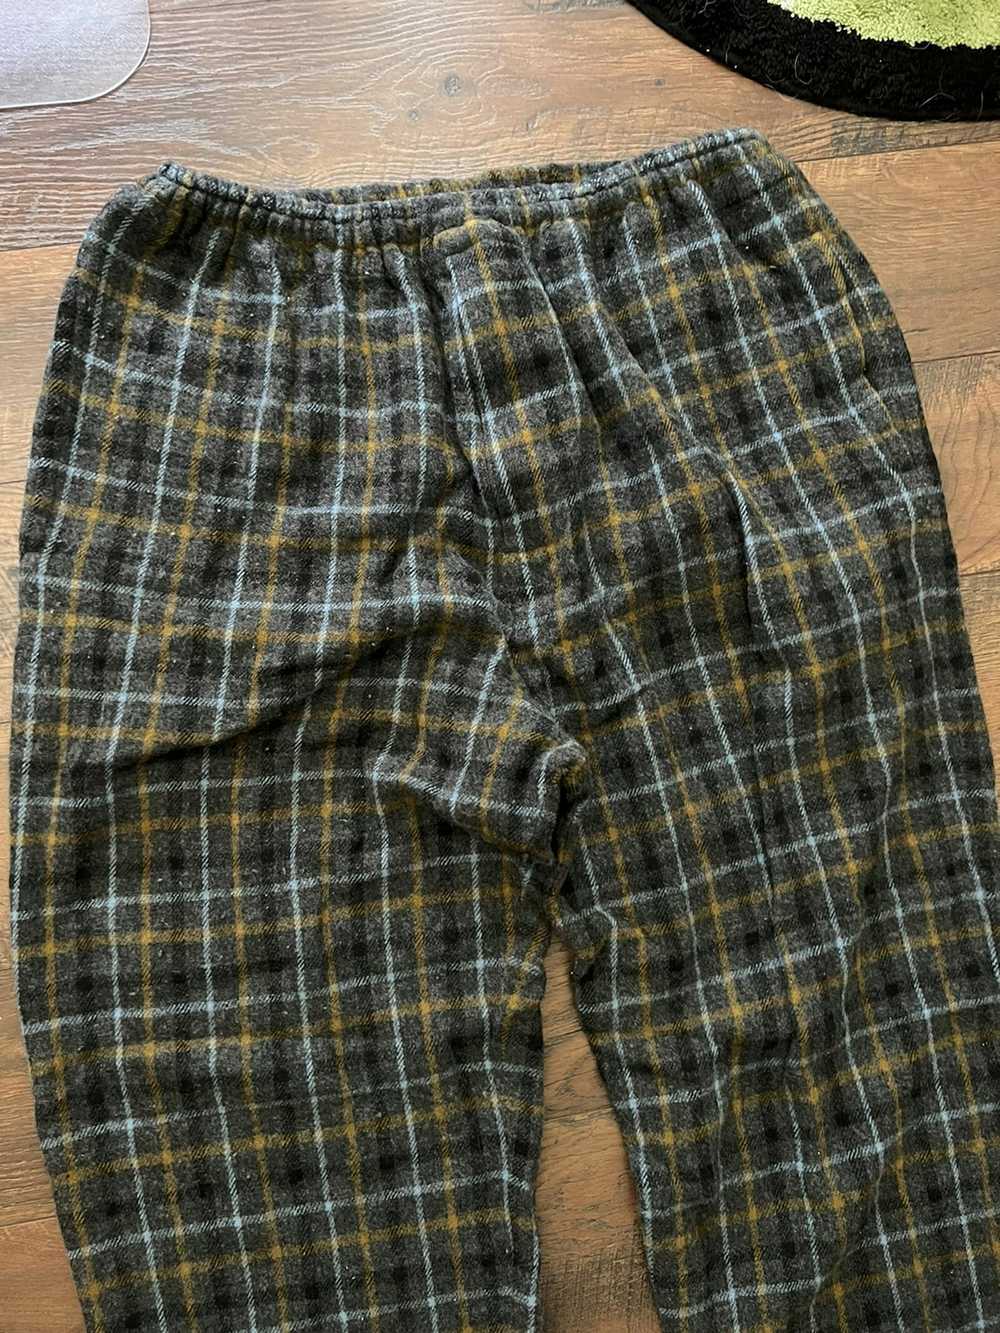 Undercover Undercover wool plaid pants - image 2